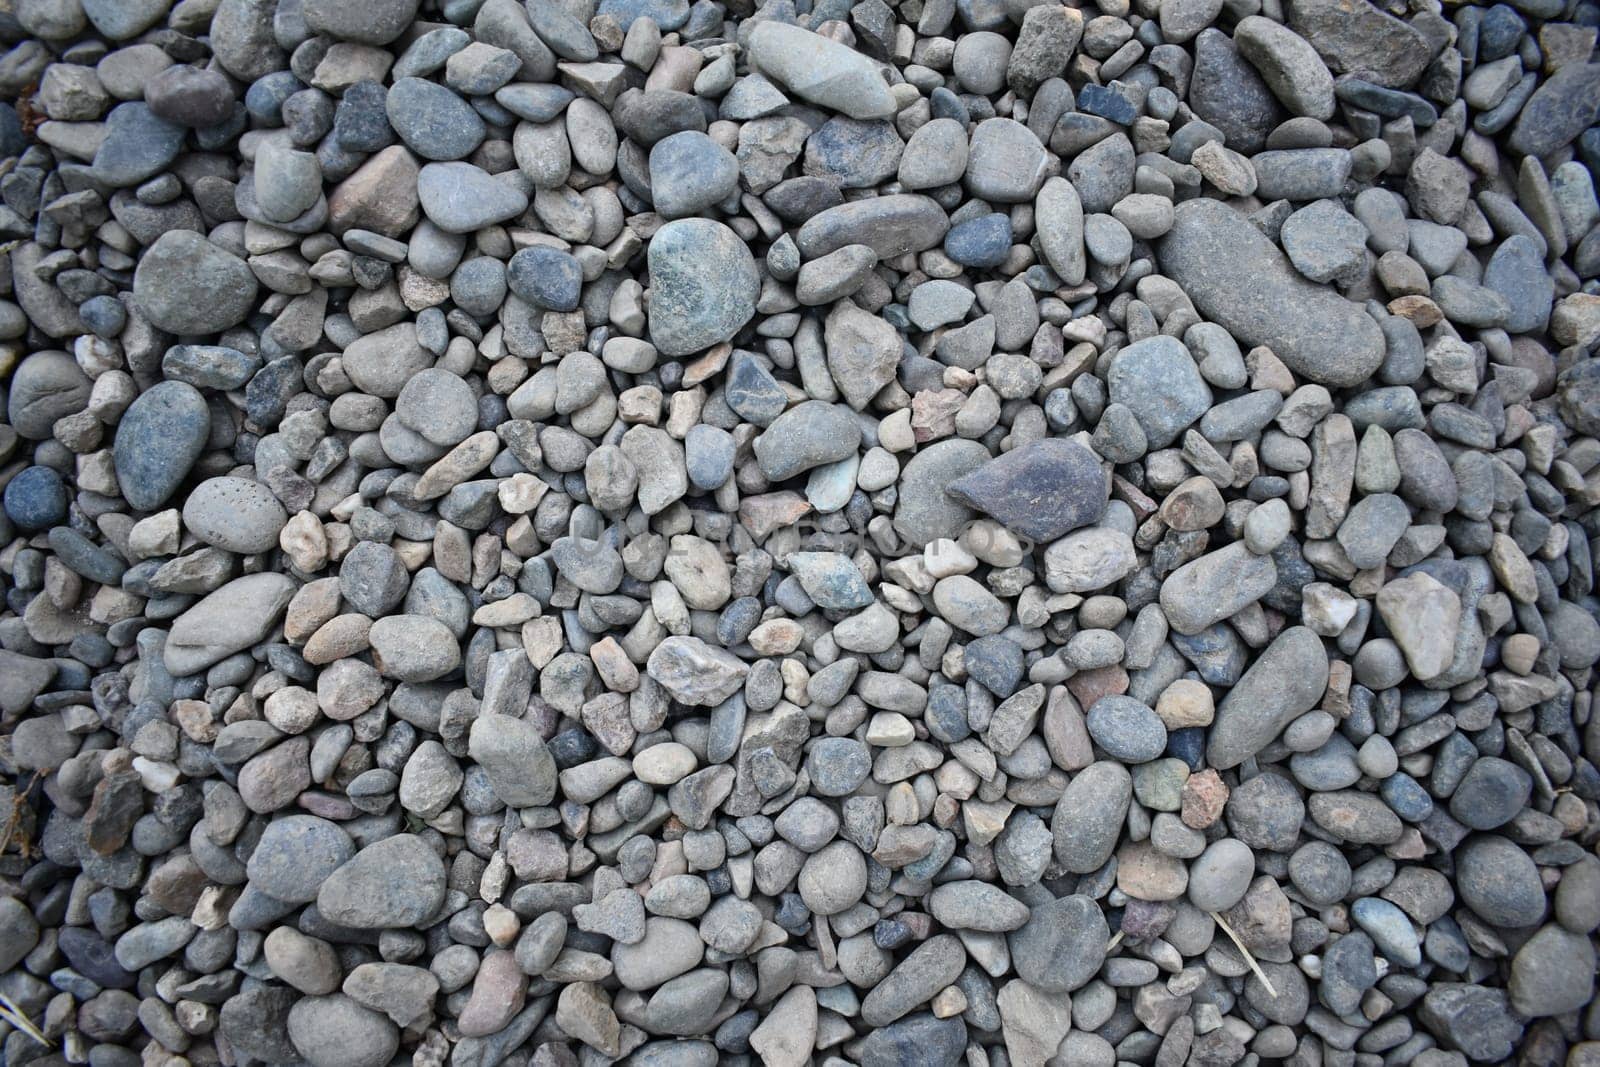 Smooth Pebble Texture on Ground in Northern California. High quality photo